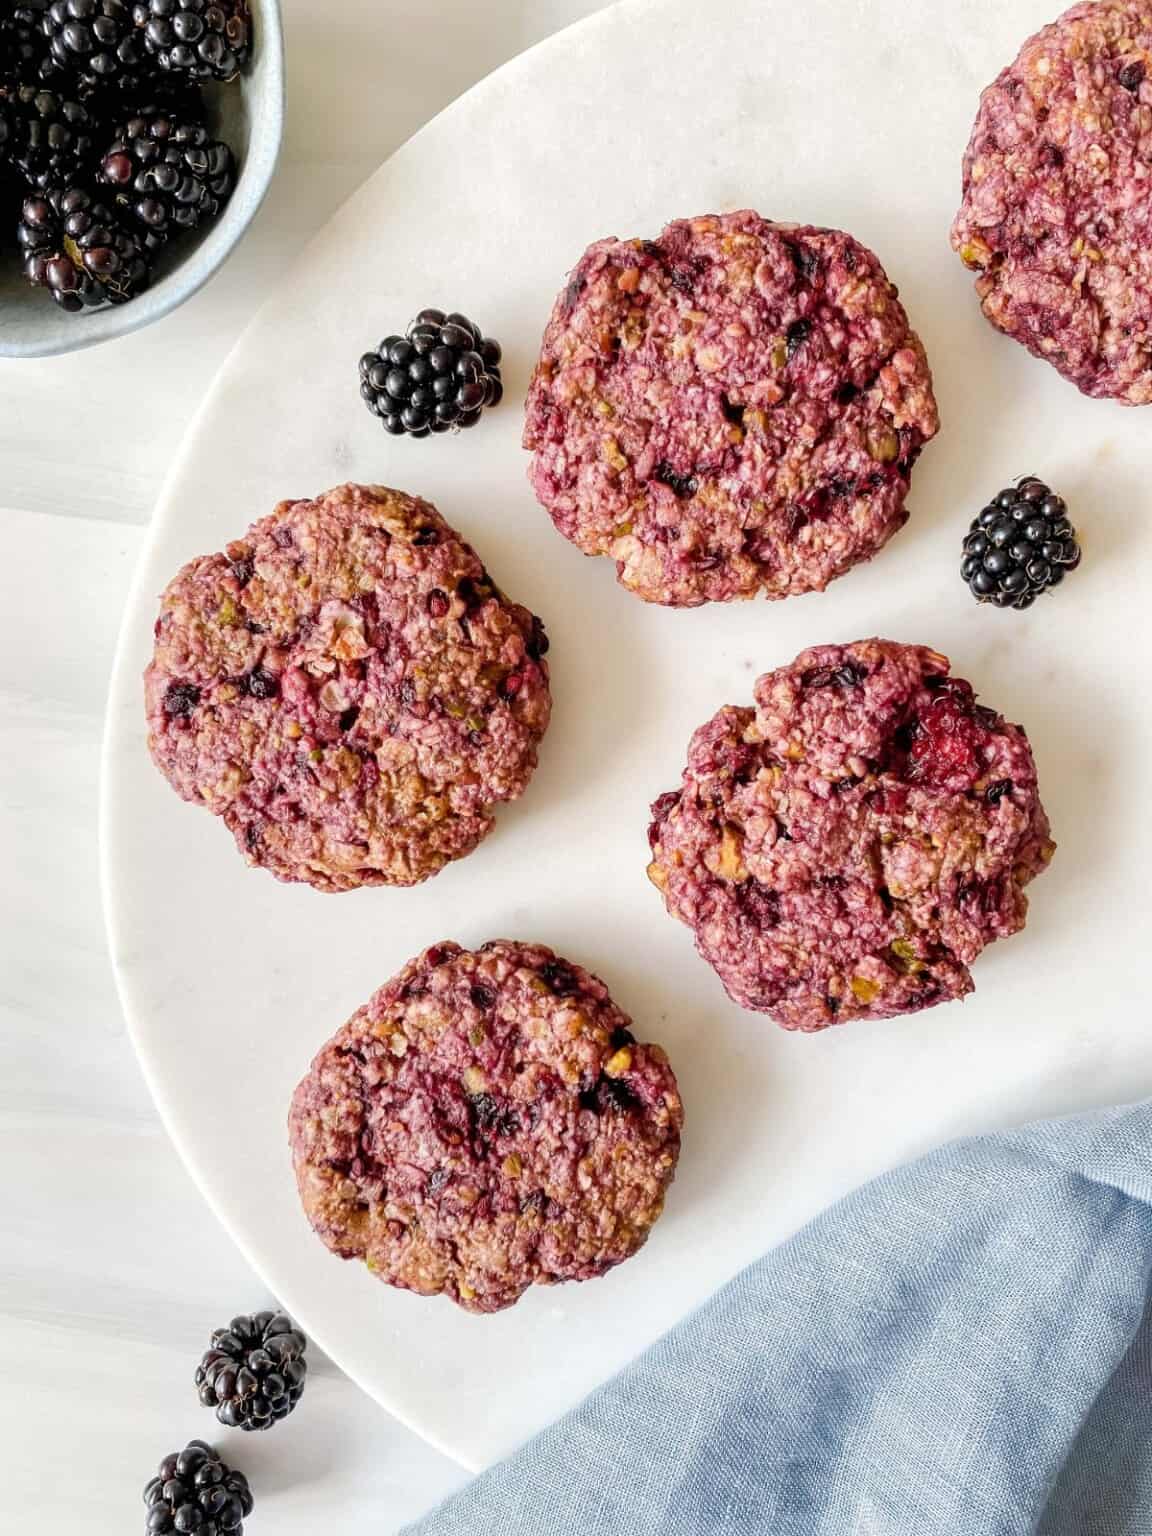 Blackberries and blackberry oatmeal cookies on a plate.